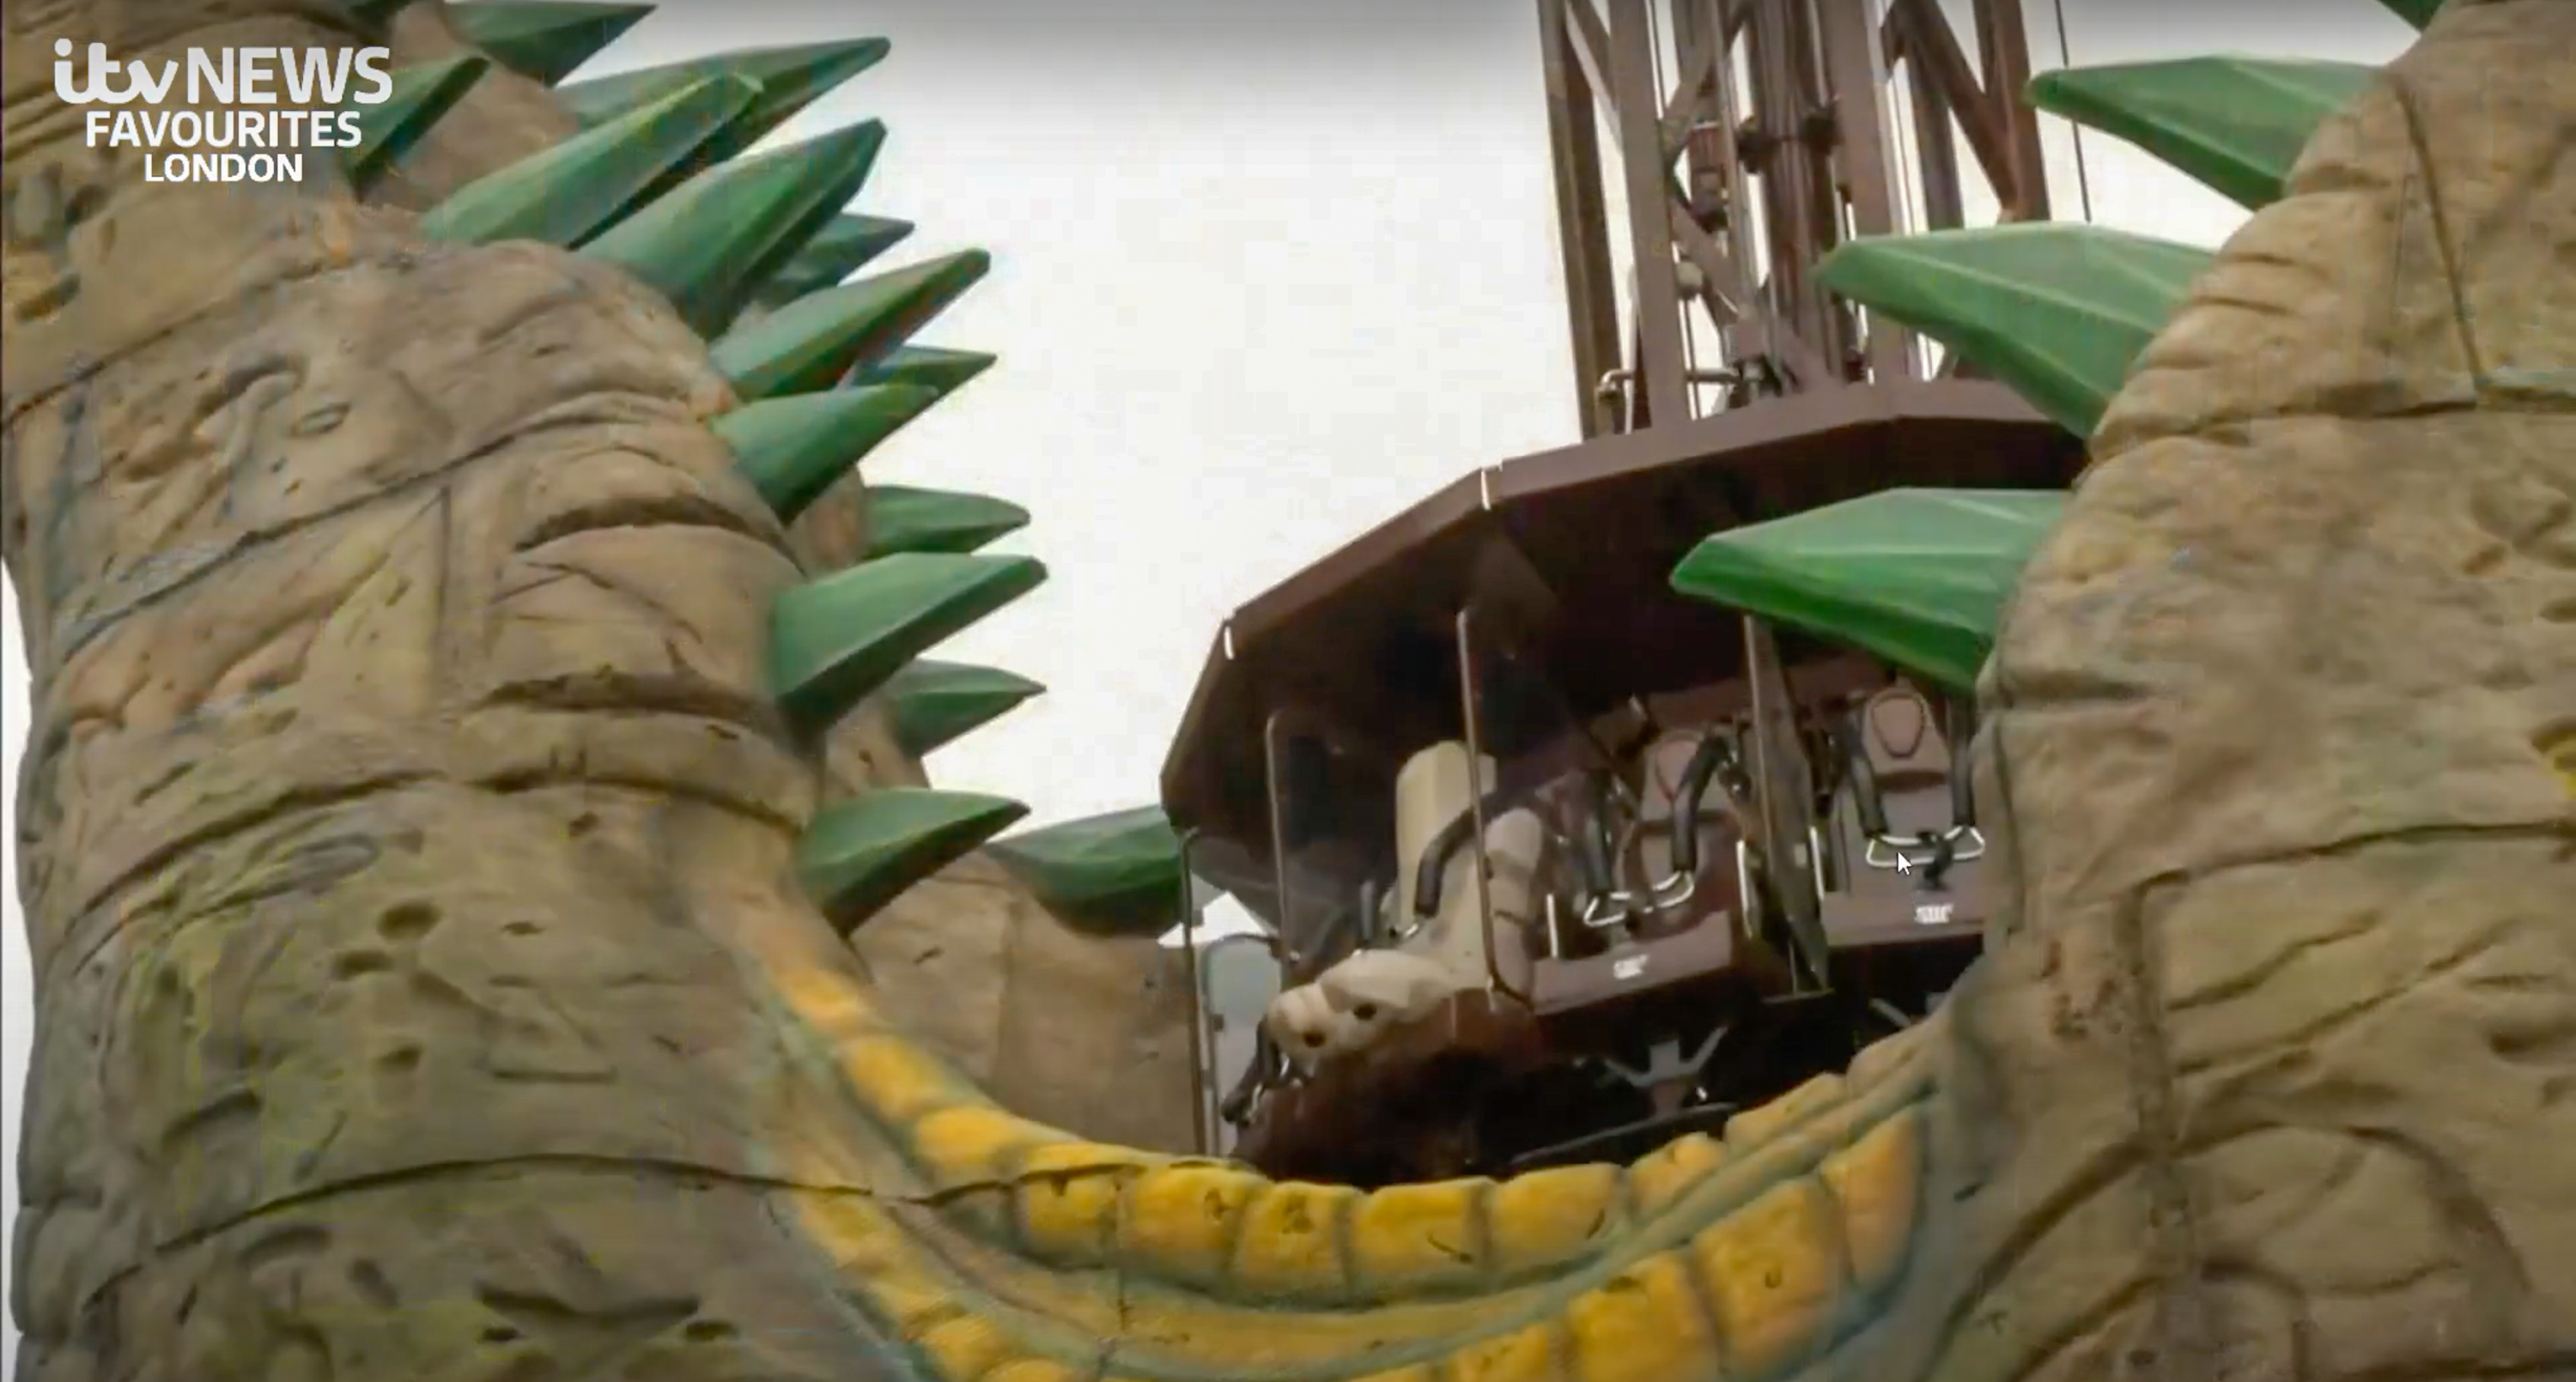 ITV Behind Closed Doors Features Chessington World of Adventures